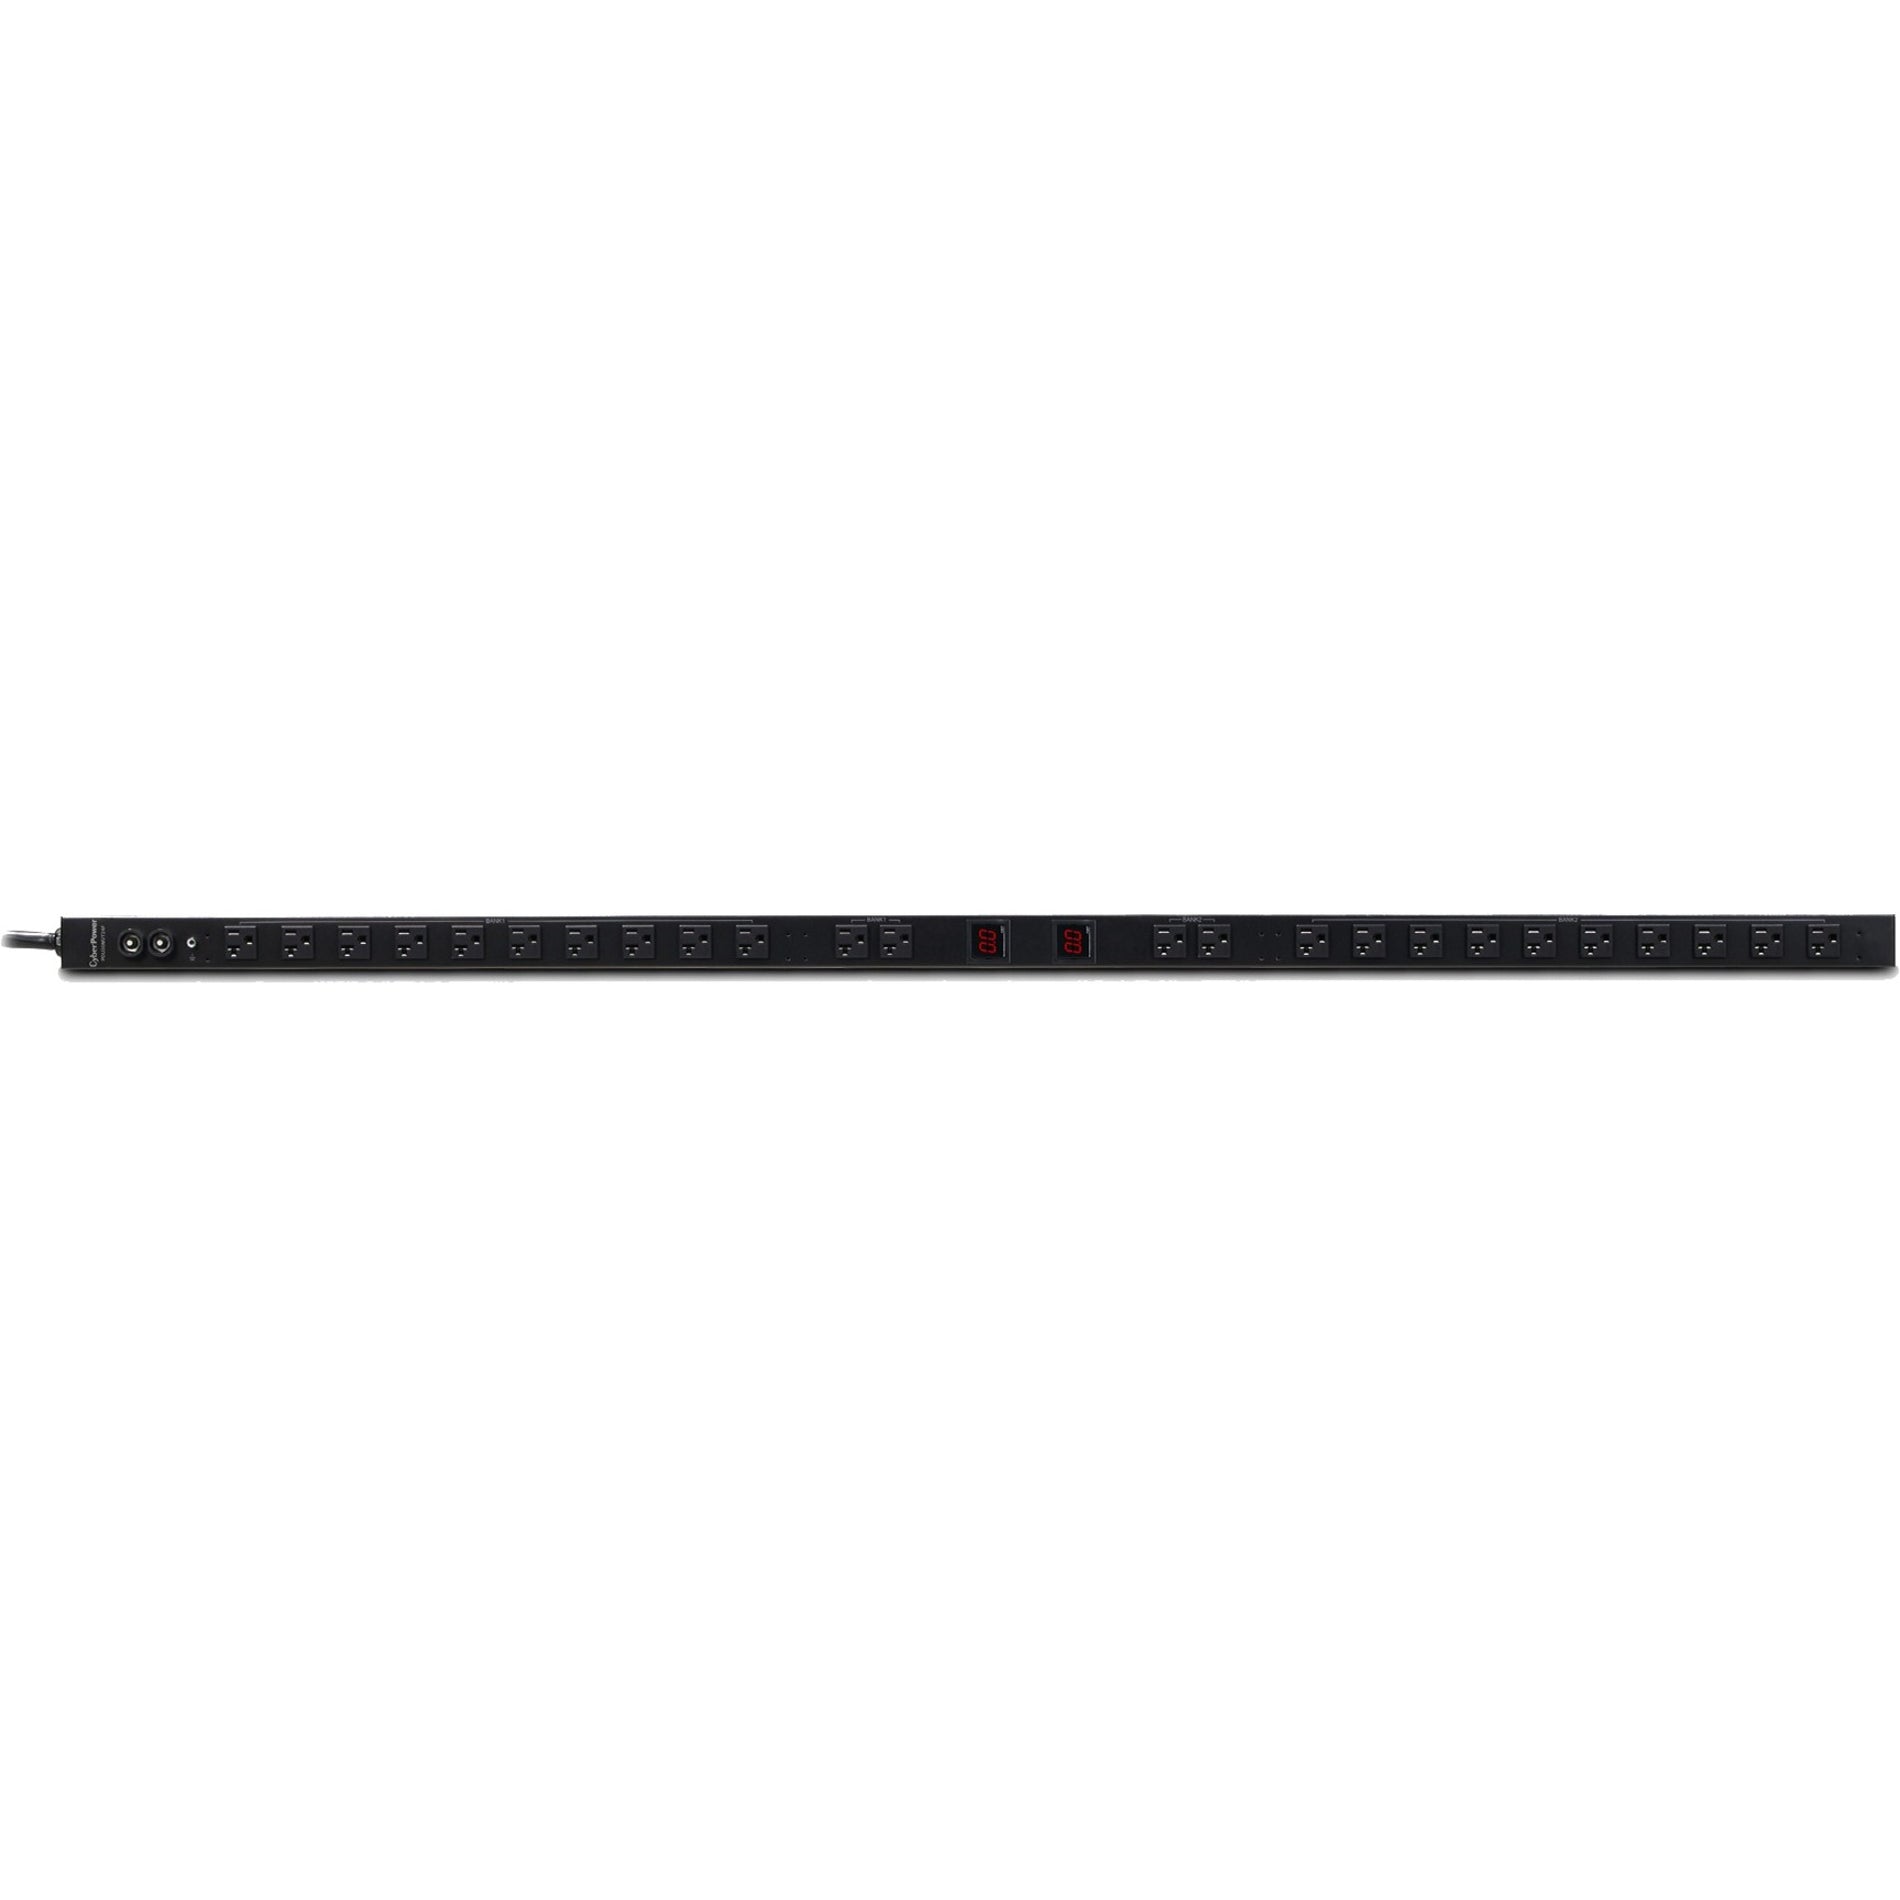 CyberPower PDU30MVT24F Metered PDU 24-Outlets 30A 120V AC Wall/Rack-Mountable 